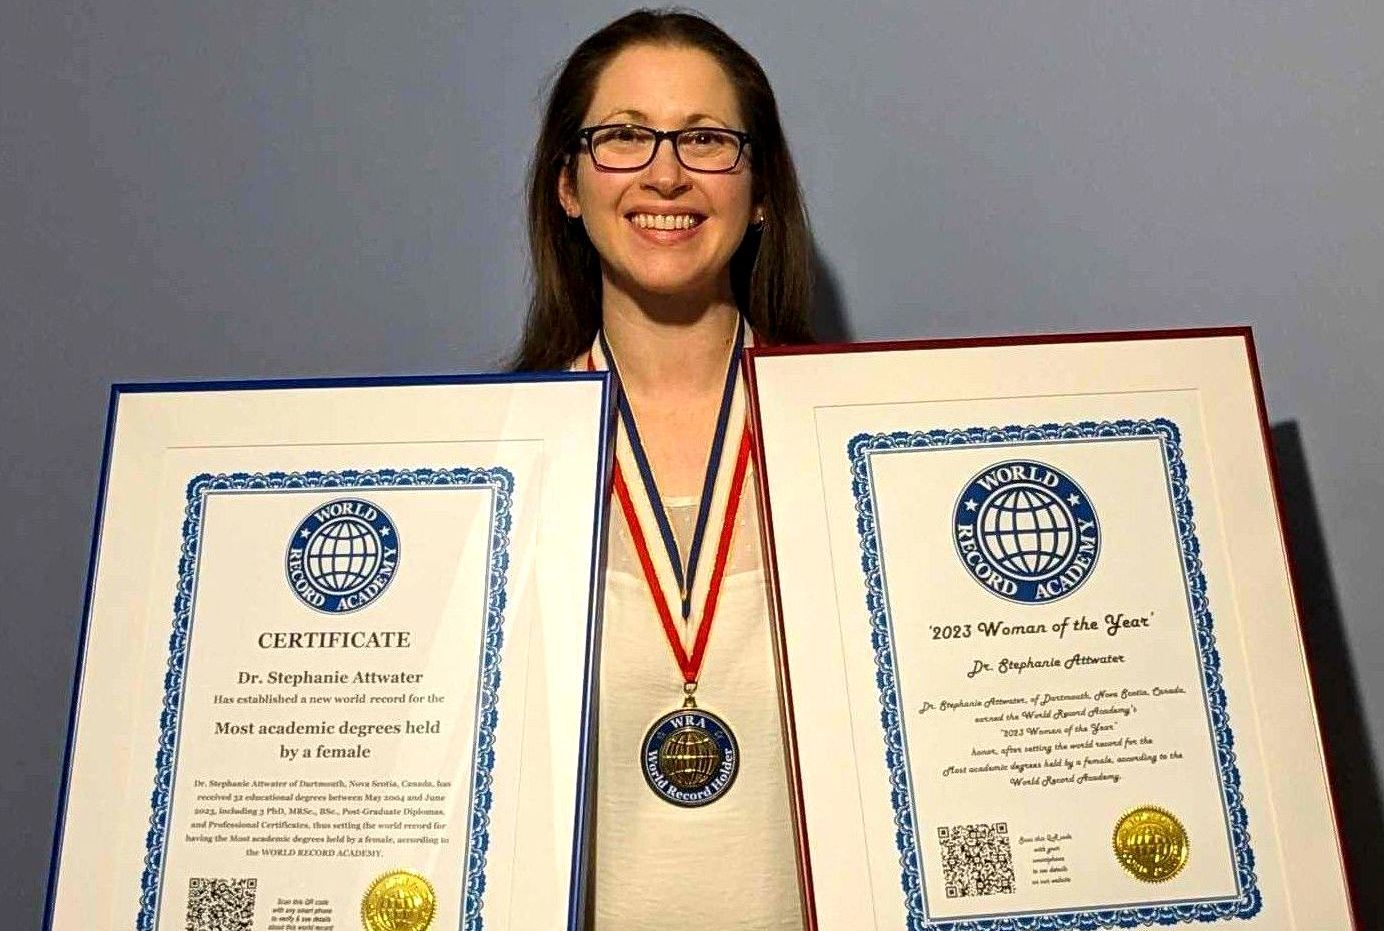 
World Record Academy's 2023 Woman of the Year: Dr. Stephanie Attwater